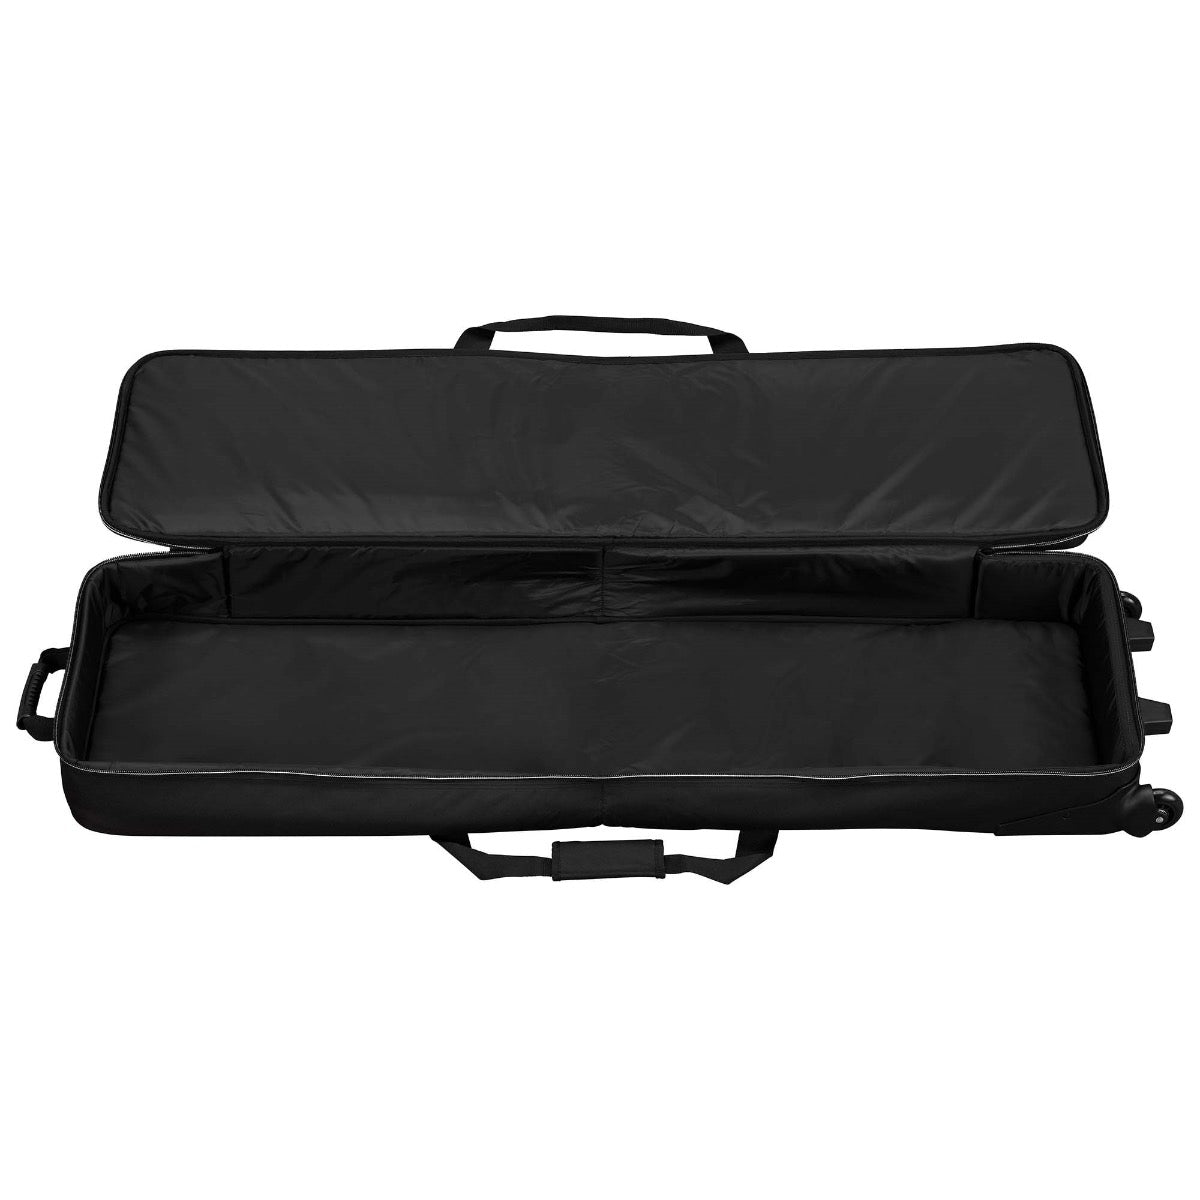 Yamaha SCDE88 Soft Case for CK88 - with Wheels, View 2